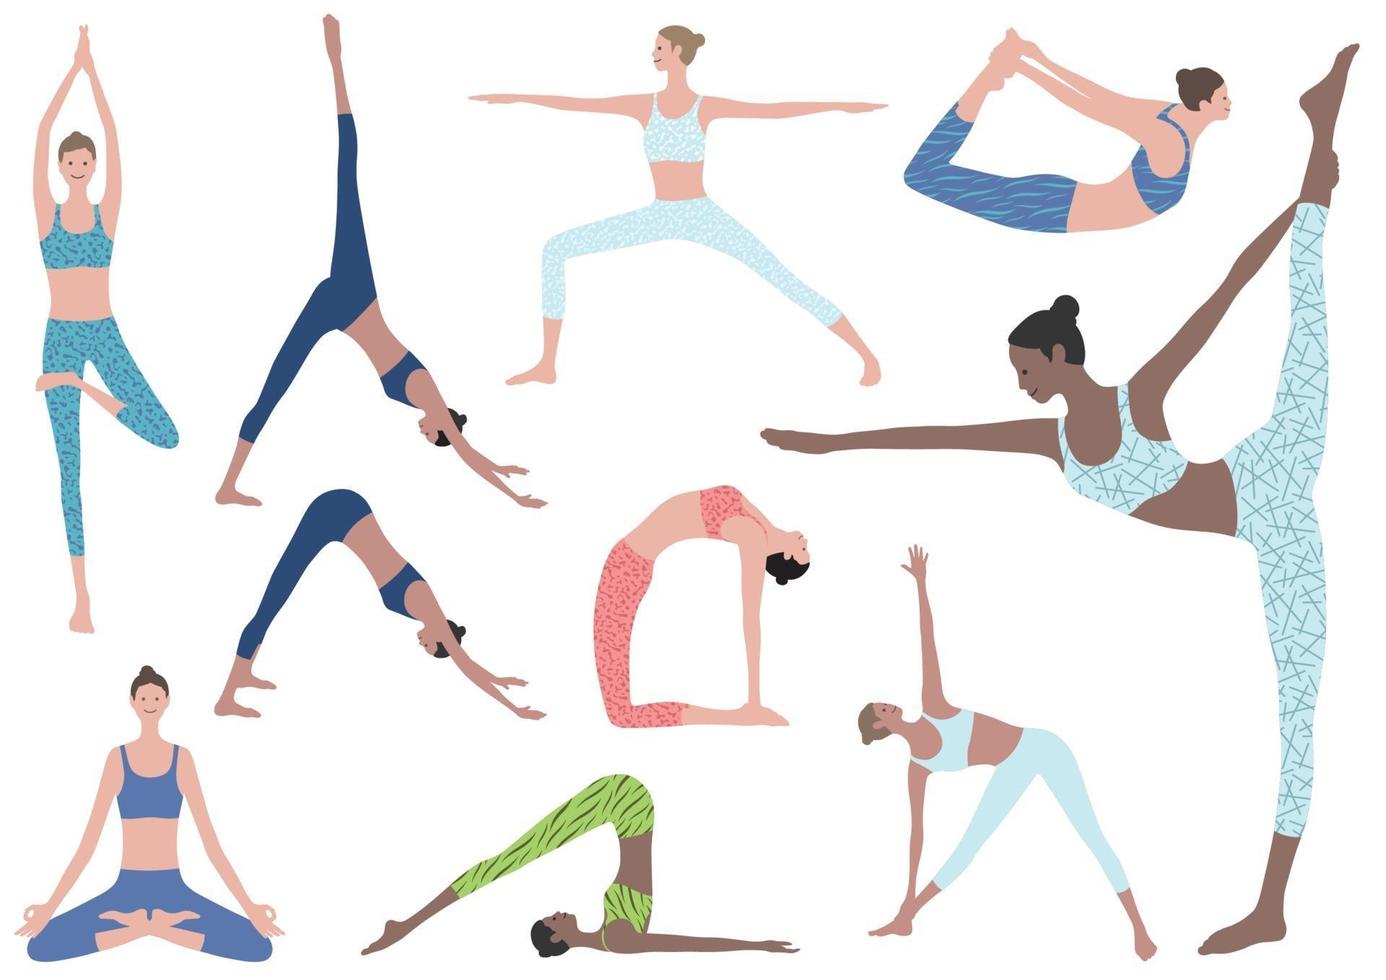 Flat Illustration Set Of Woman Doing Yoga Exercises. Vector Icons Of Various Yoga Positions Isolated On A White Background.